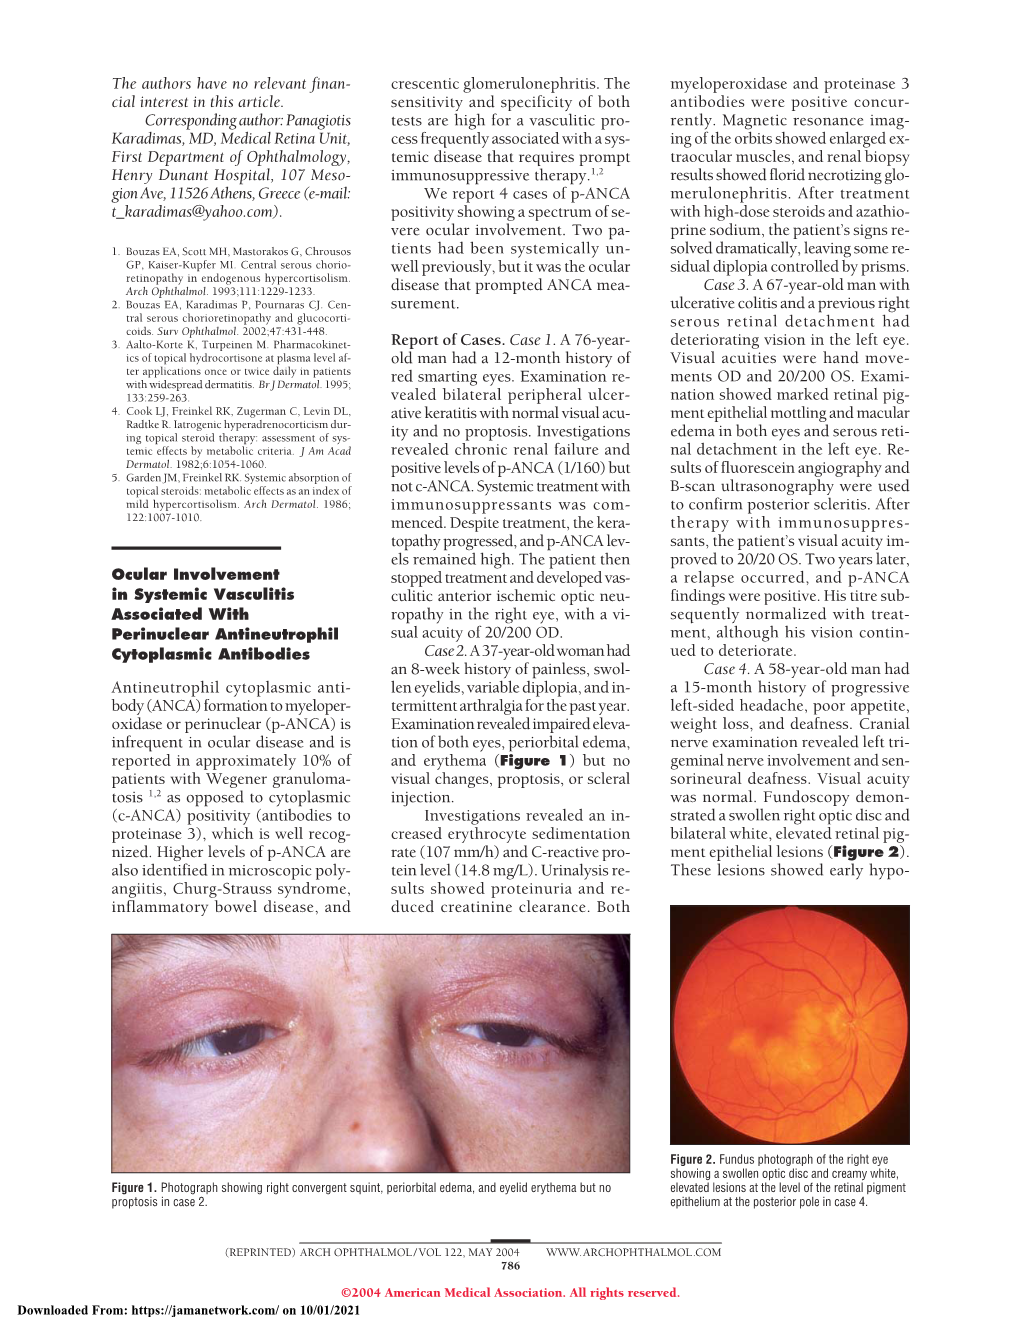 Ocular Involvement in Systemic Vasculitis Associated With